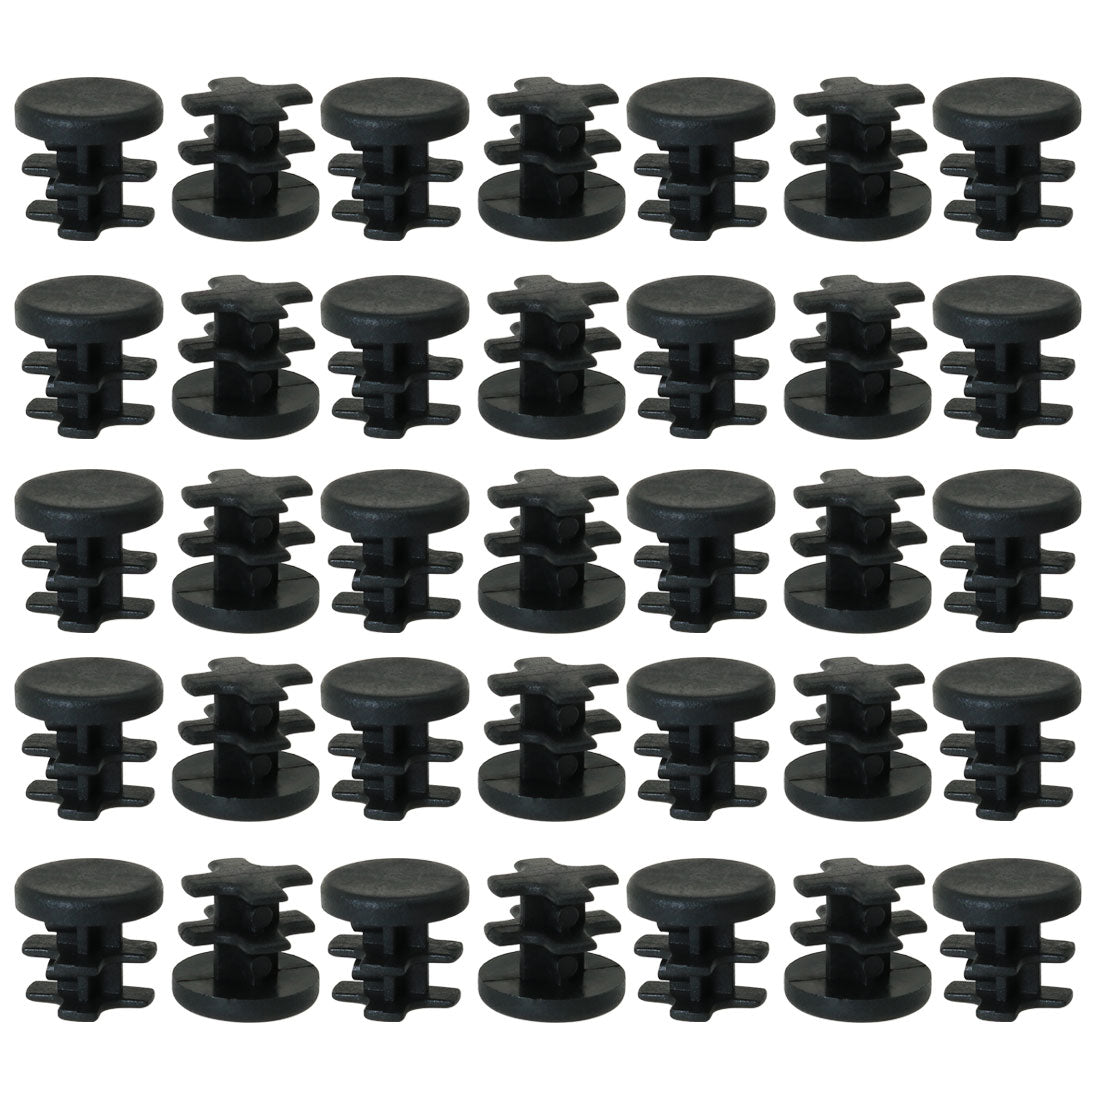 Uxcell Uxcell 1/2" 0.47" OD Plastic Round Tube Insert Glide End Cap Pad 35pcs 0.35"-0.43" Inner Dia for Furniture Tool Deck Floor Anti-scratch